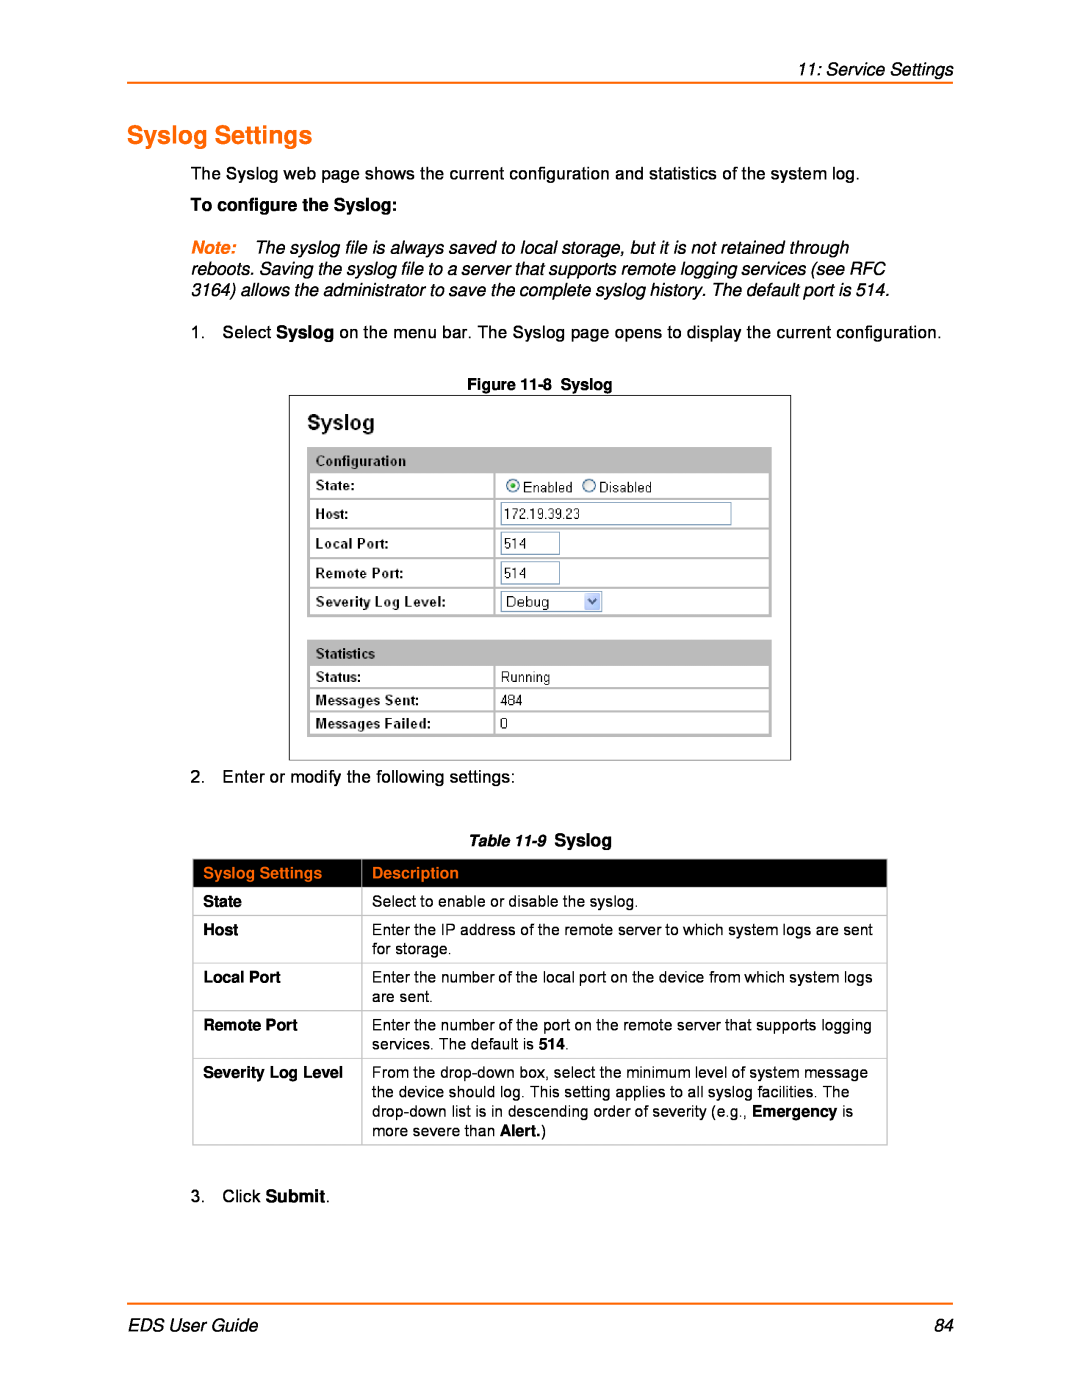 Lantronix EDS32PR manual Service Settings, To configure the Syslog, EDS User Guide, 9 Syslog, Syslog Settings, Description 